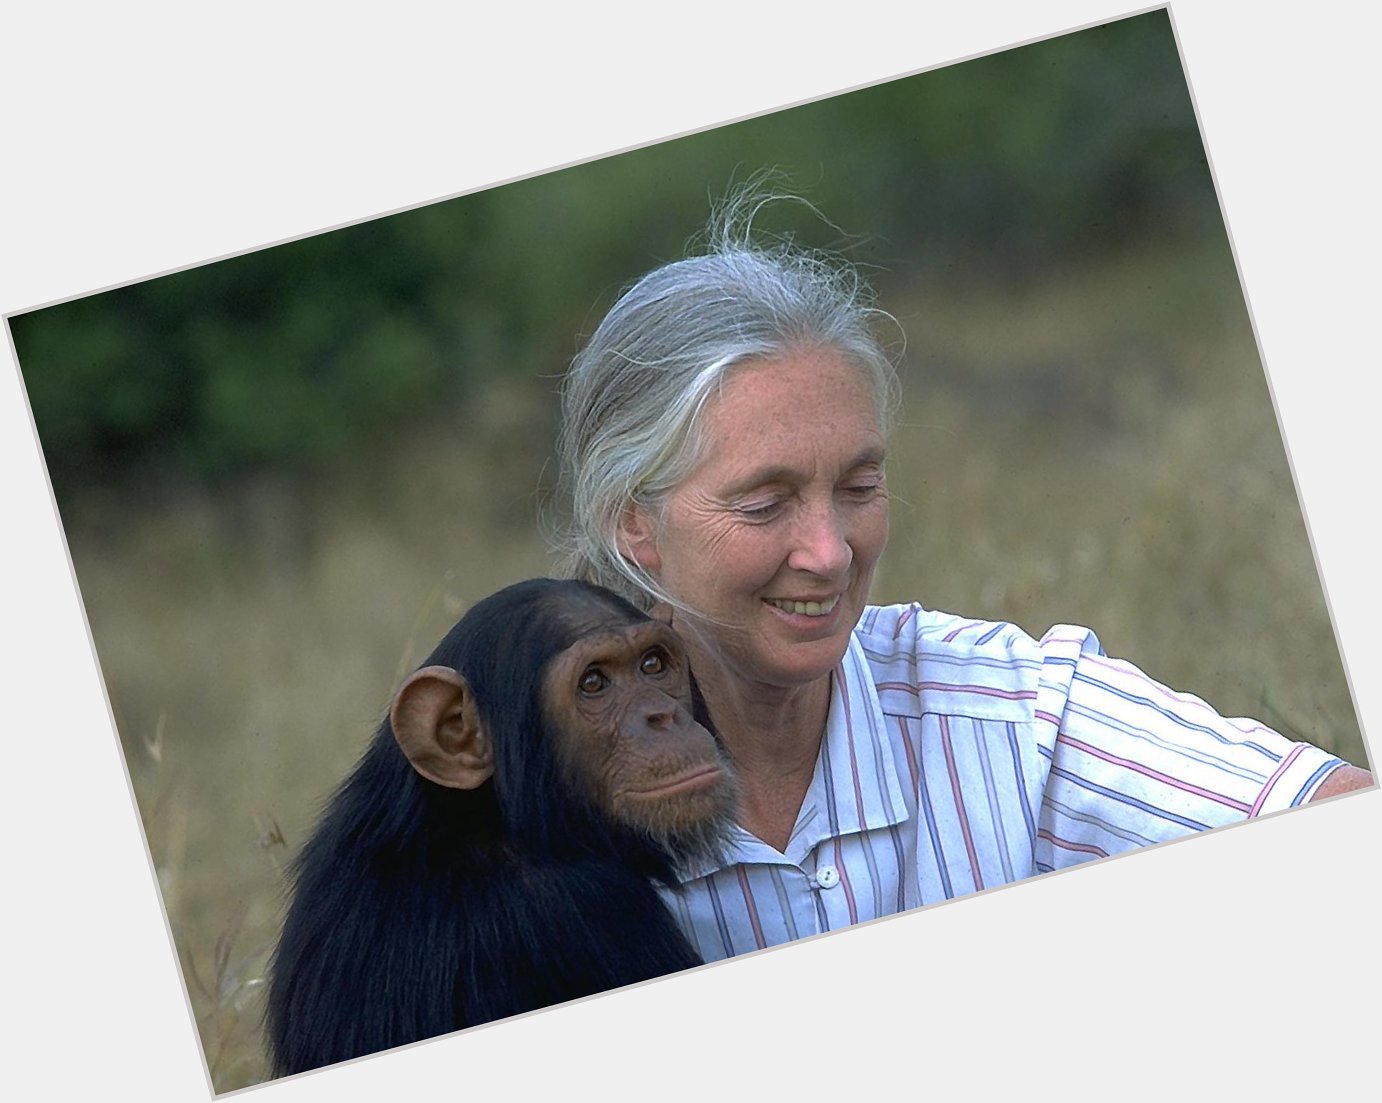 Today in Geek History: Happy bday, Jane Goodall! The primatologist, ethologist *and* anthropologist was born in 1934. 